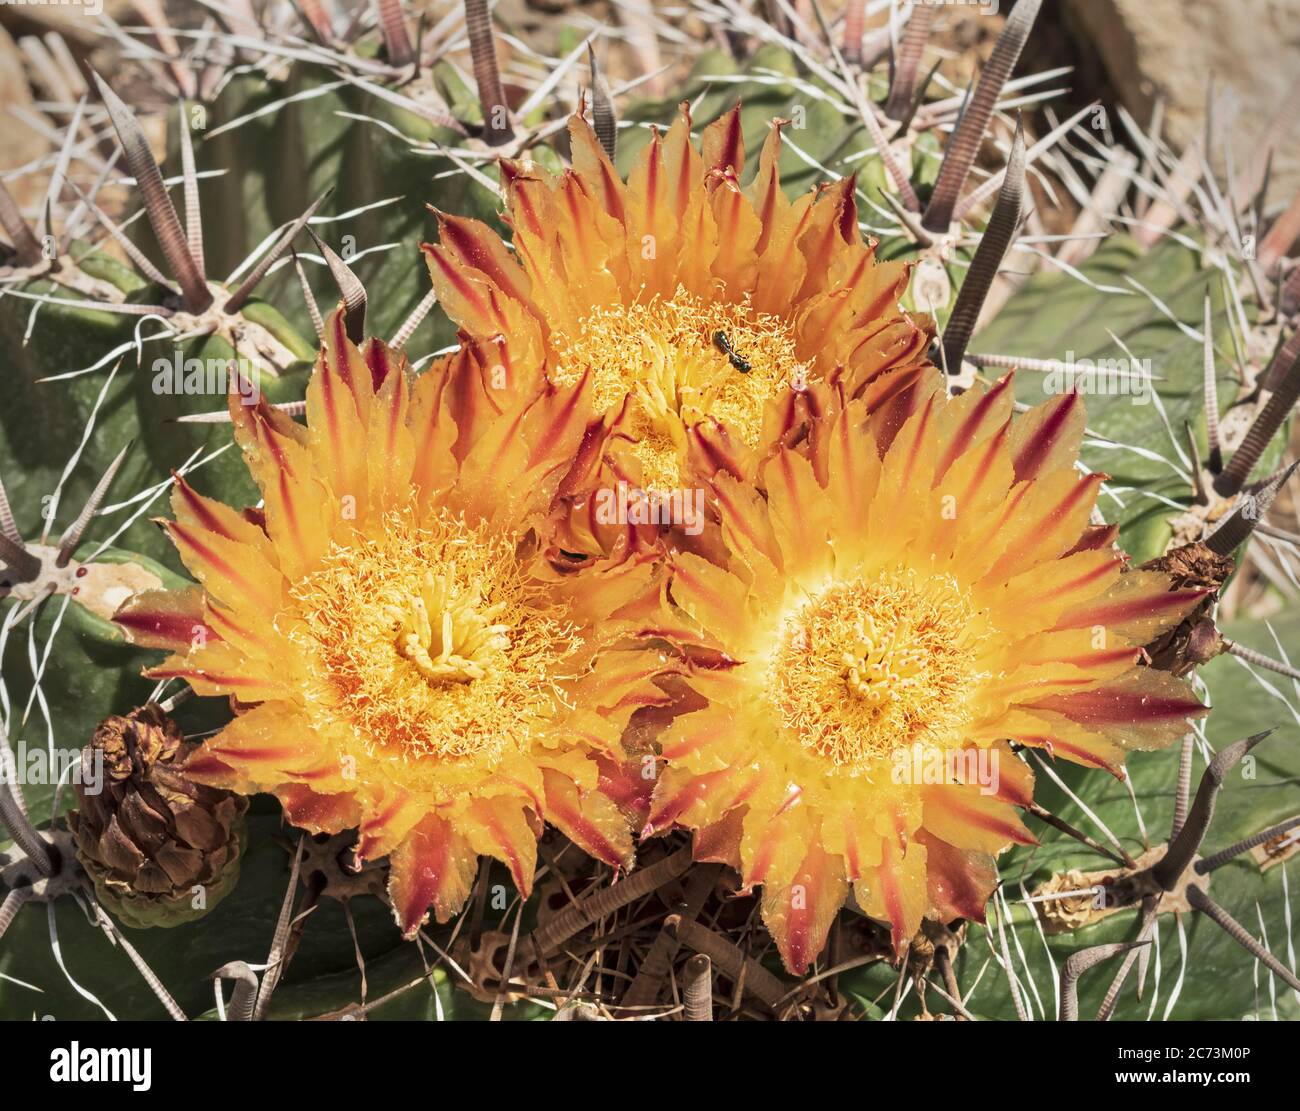 a tight cluster of three beautiful intense yellow and red arizona barrel ferocactus wislizeni cactus flowers above the slightly blurred ugly plant Stock Photo